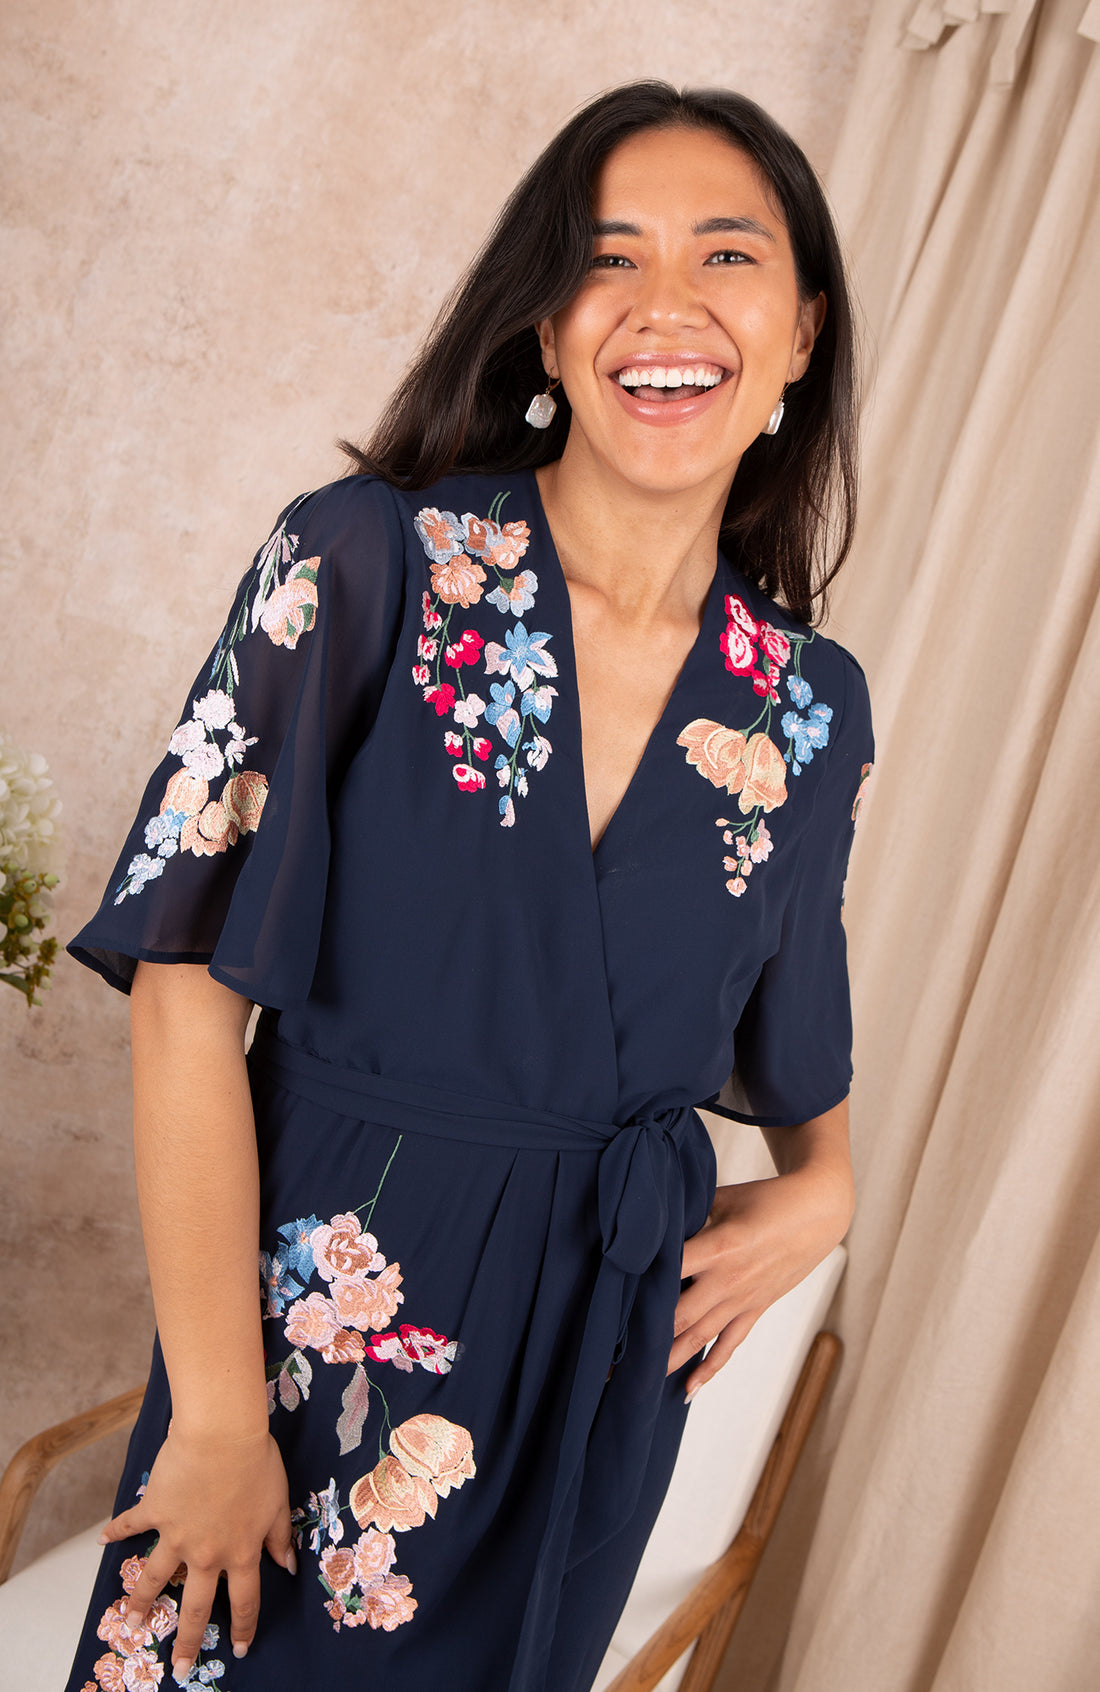 THE CLAIRE EMBROIDERED FLUTTER SLEEVE MIDI WRAP DRESS